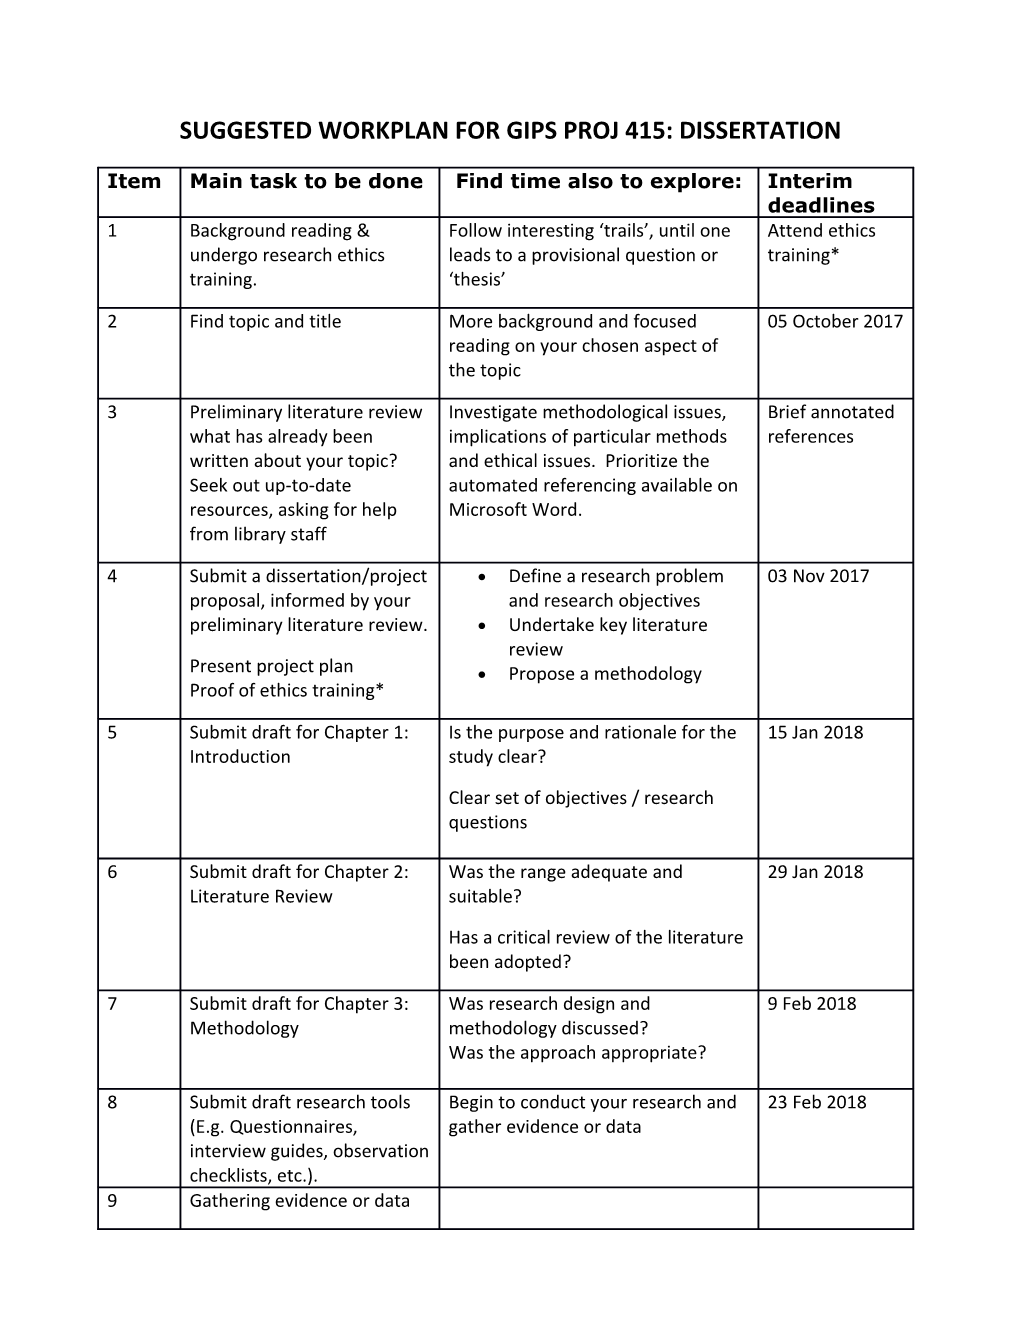 Suggested Workplan for Gips Proj 415: Dissertation